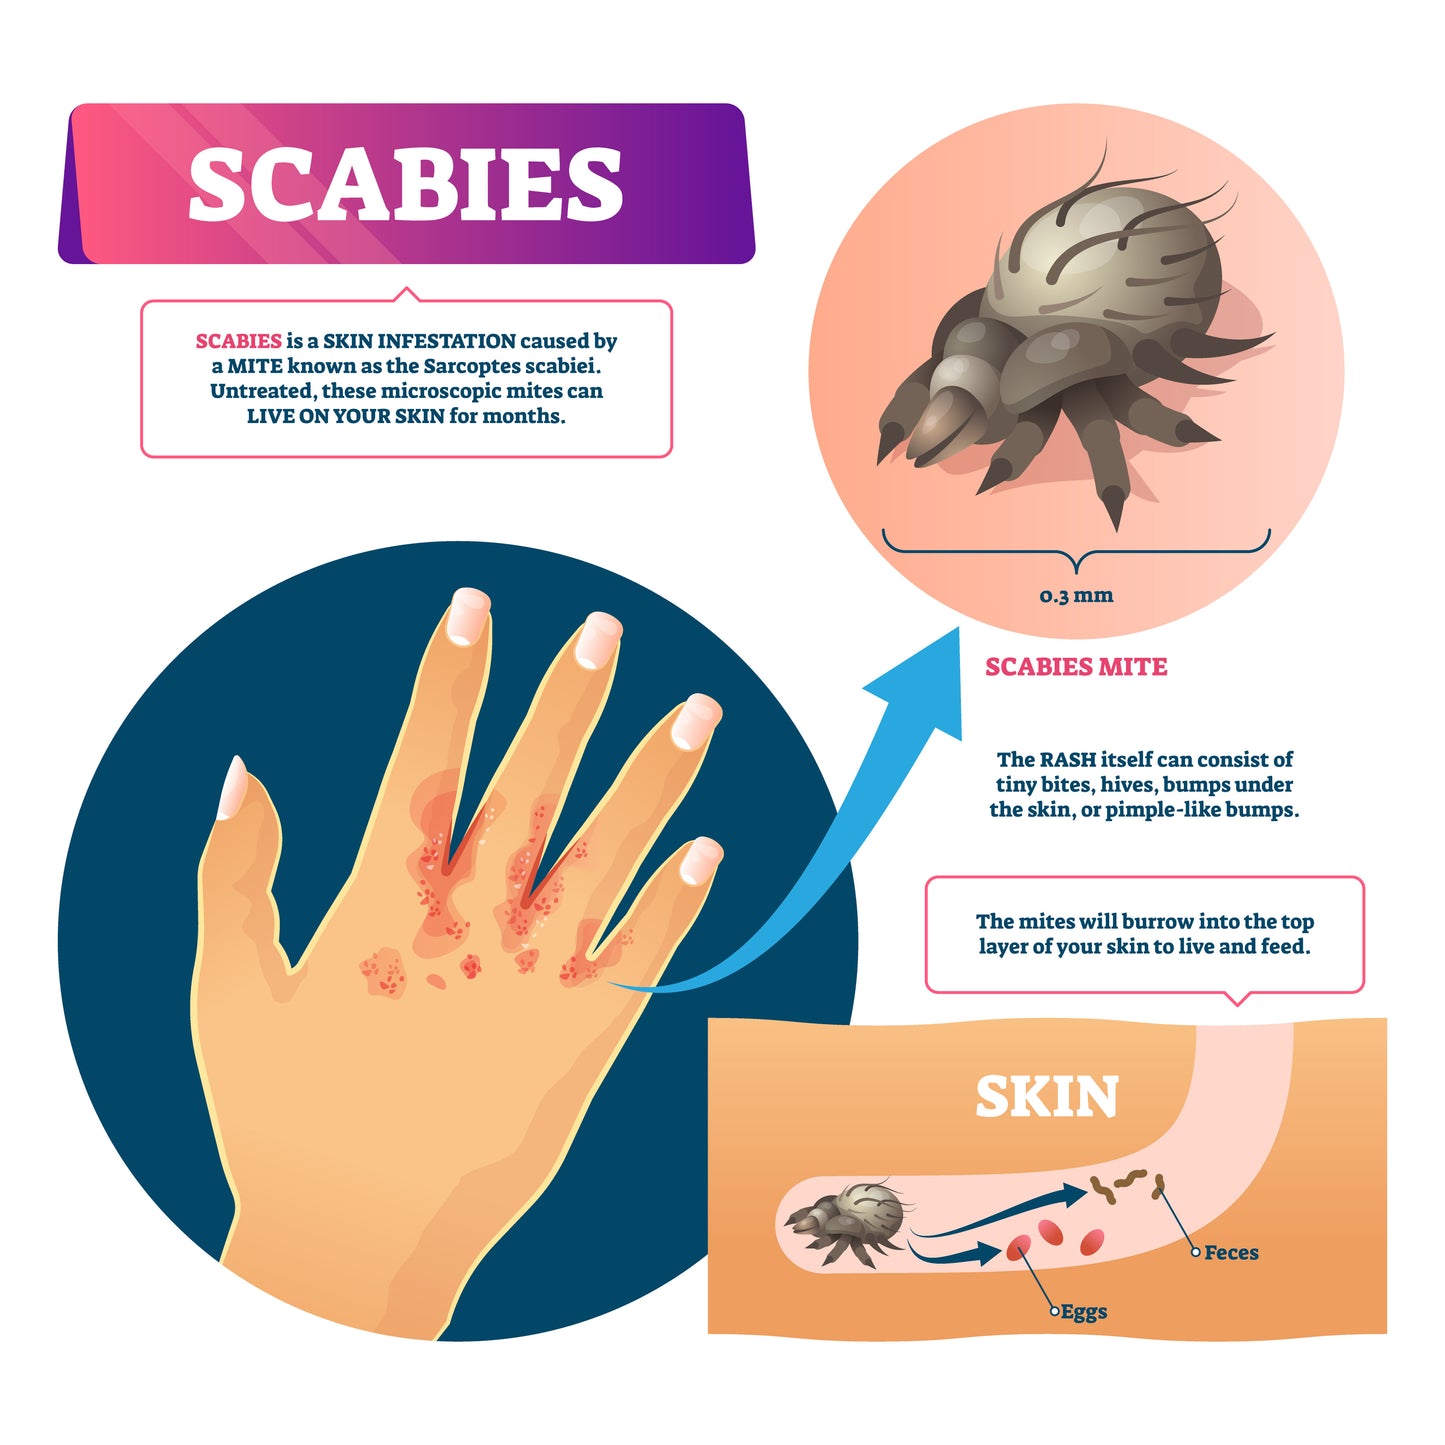 Scabies Treatment Cream | Buy One, Get a 2nd @ 25% Off | 2 - 4 oz Bottles